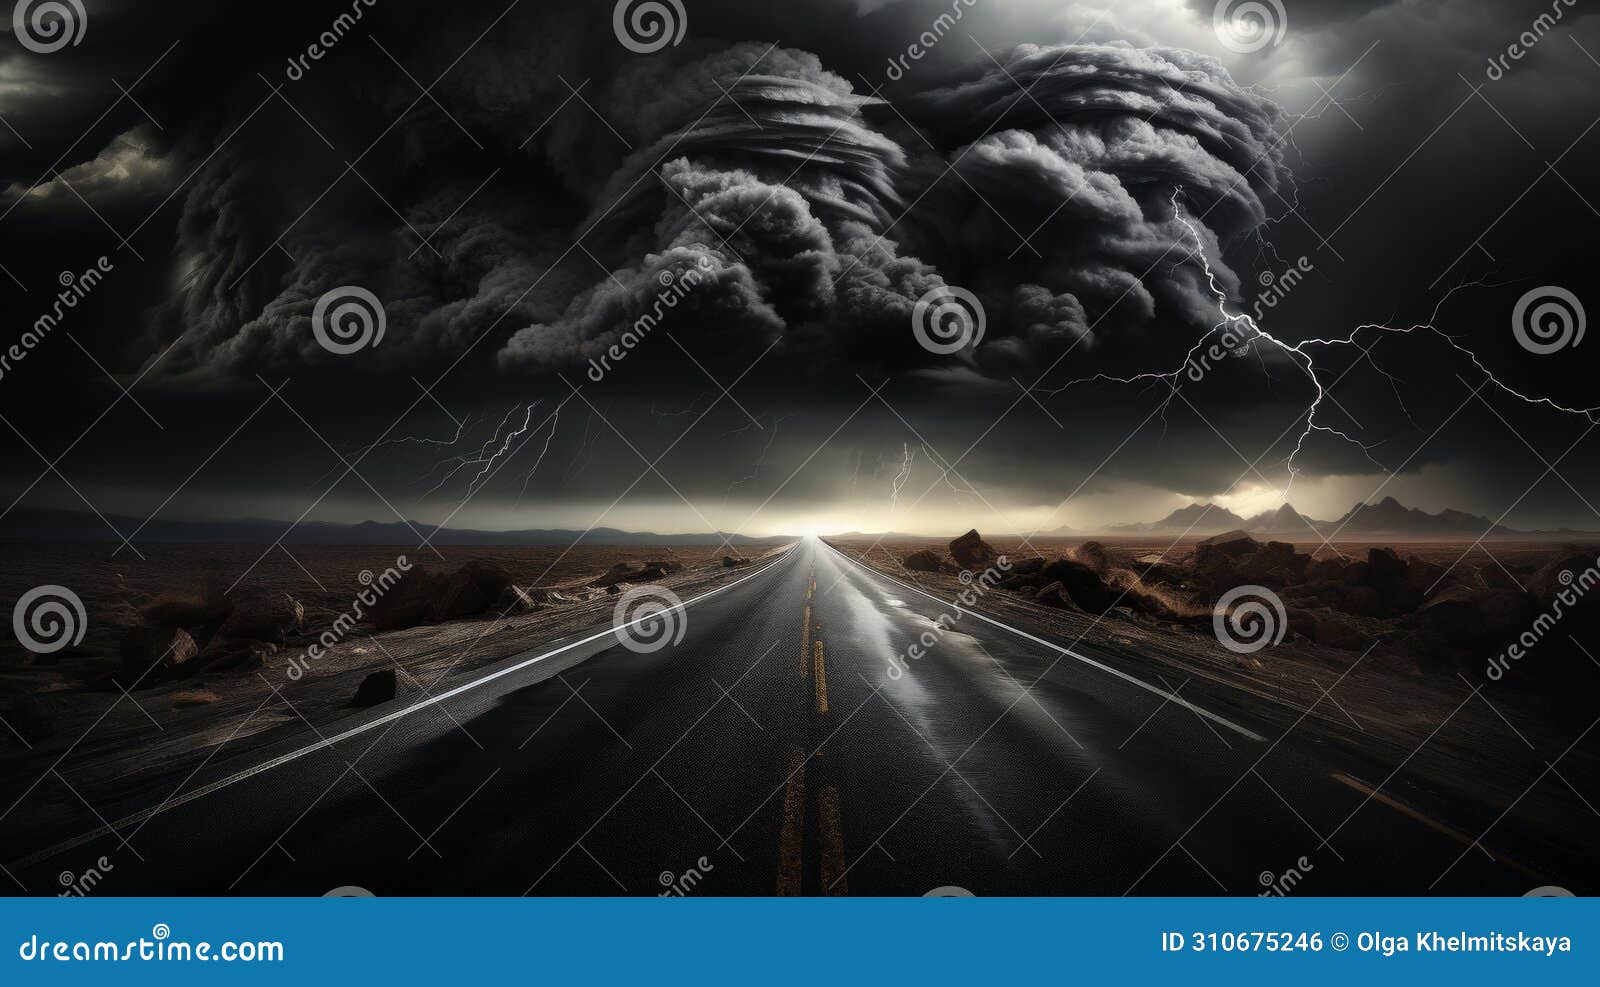 ominous sky and serene landscape with dark clouds gathering, signaling approaching tornado